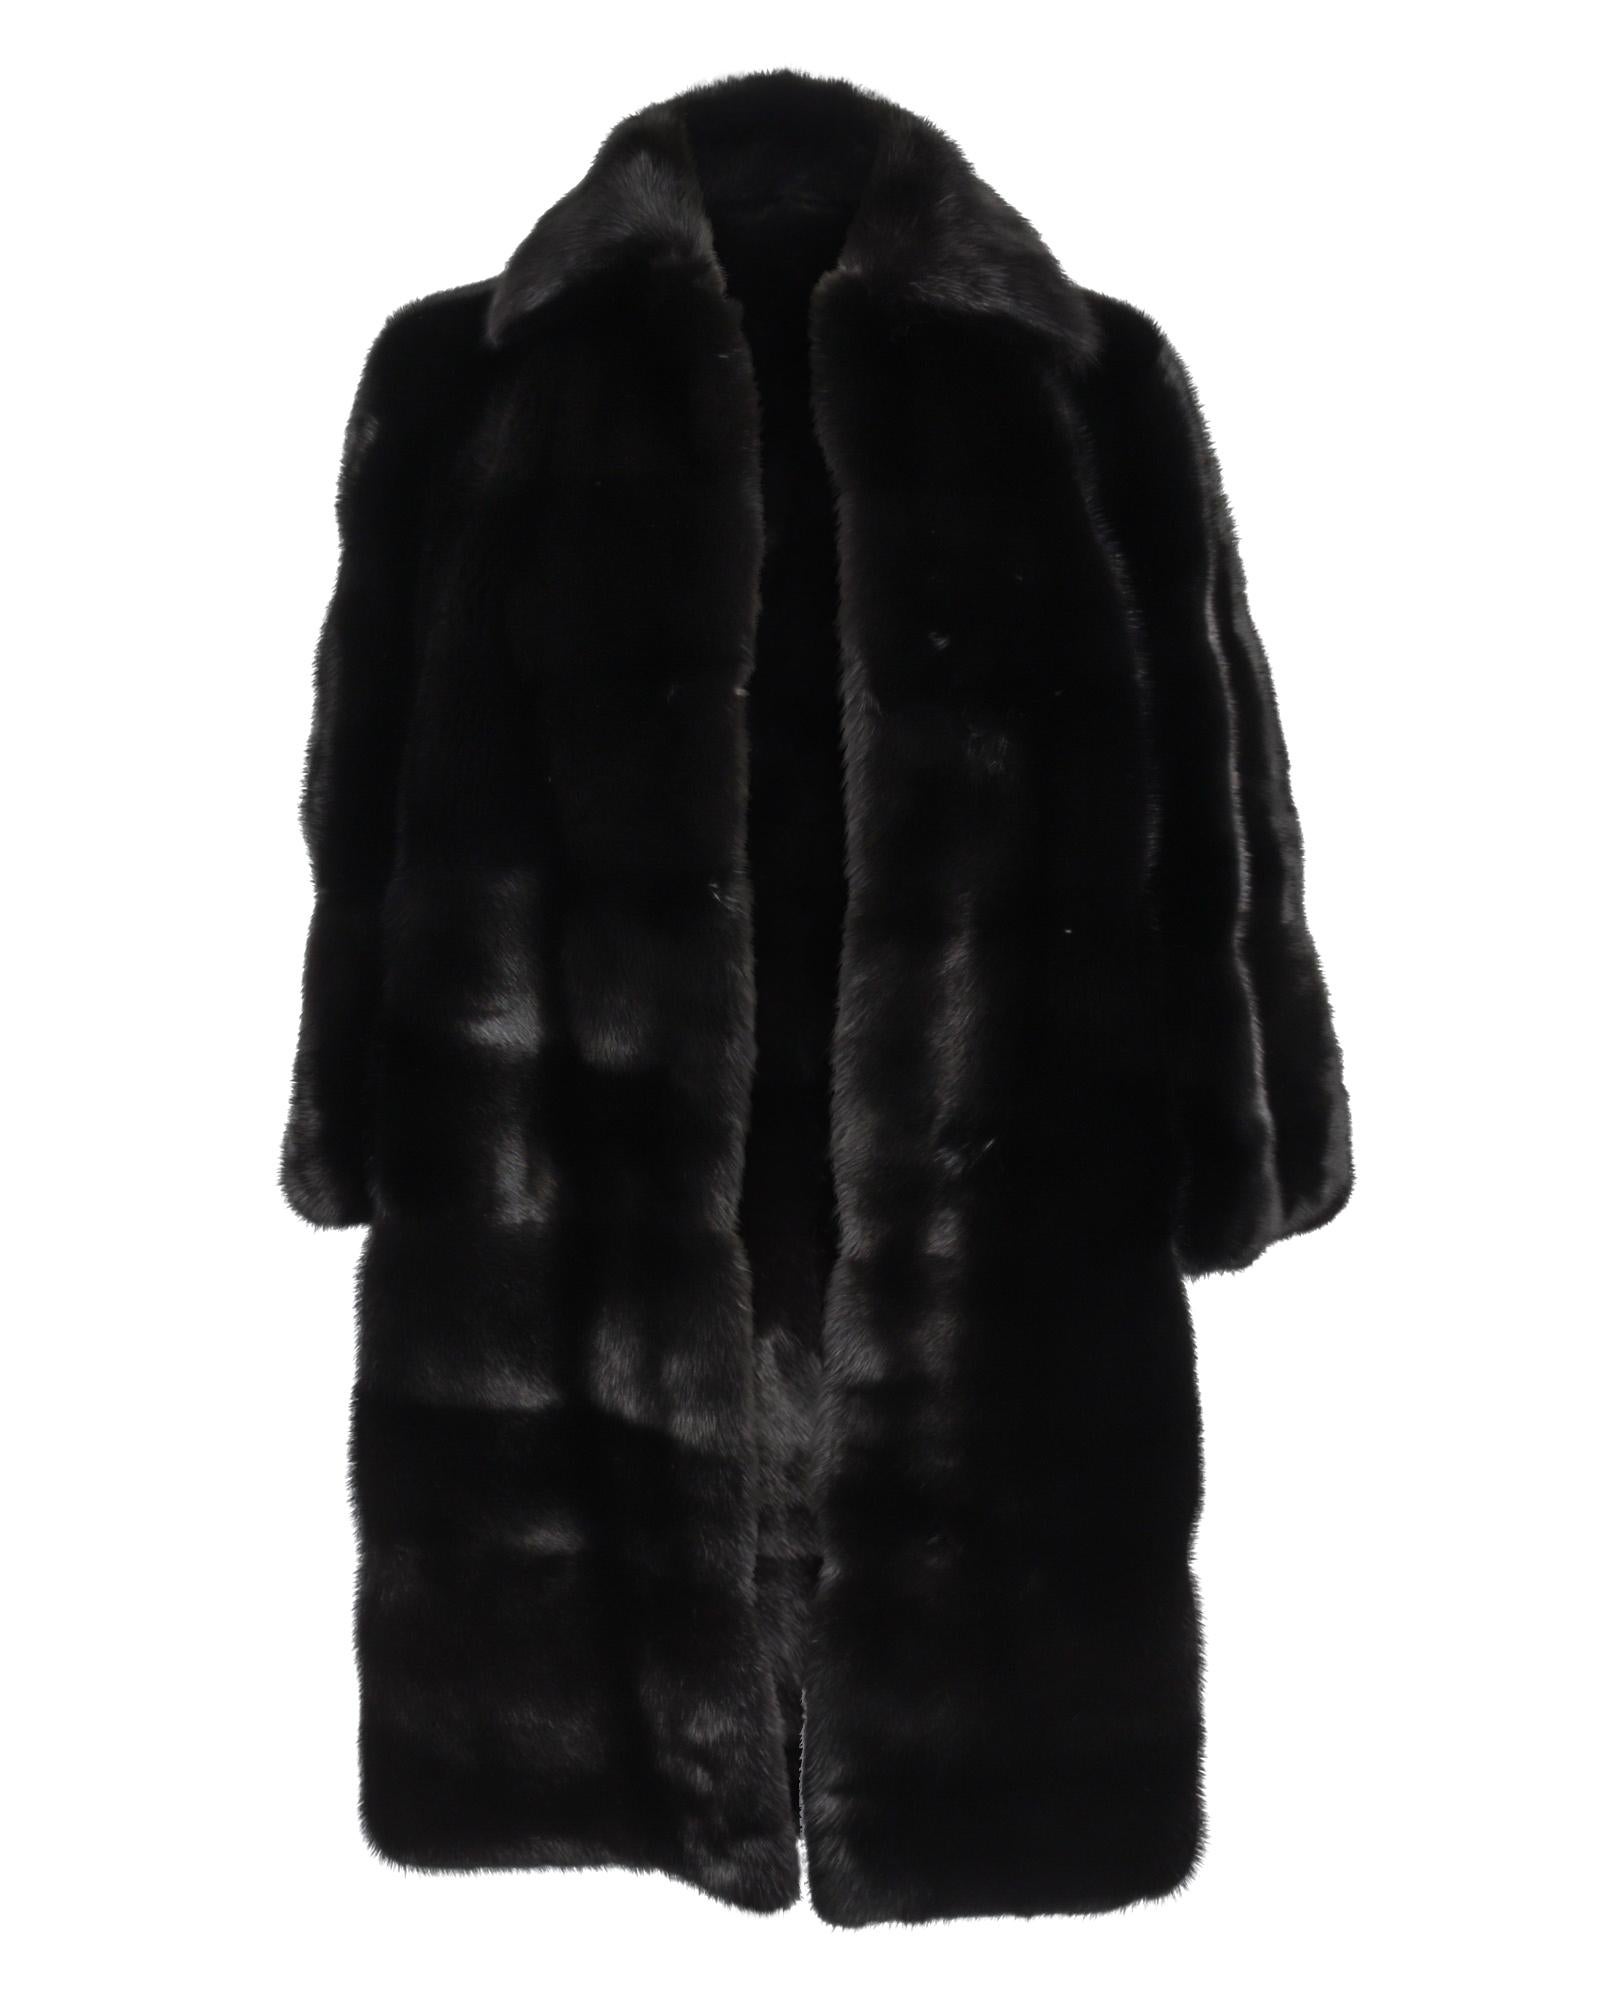 Extraordinary Gucci Black knee length (mid length) mink coat features a straight cut with modern 3/4 sleeves.
This rich glossy sophisticated Gucci fur coat is timeless and will always make a statement in every room you enter.
Classic collar with 4